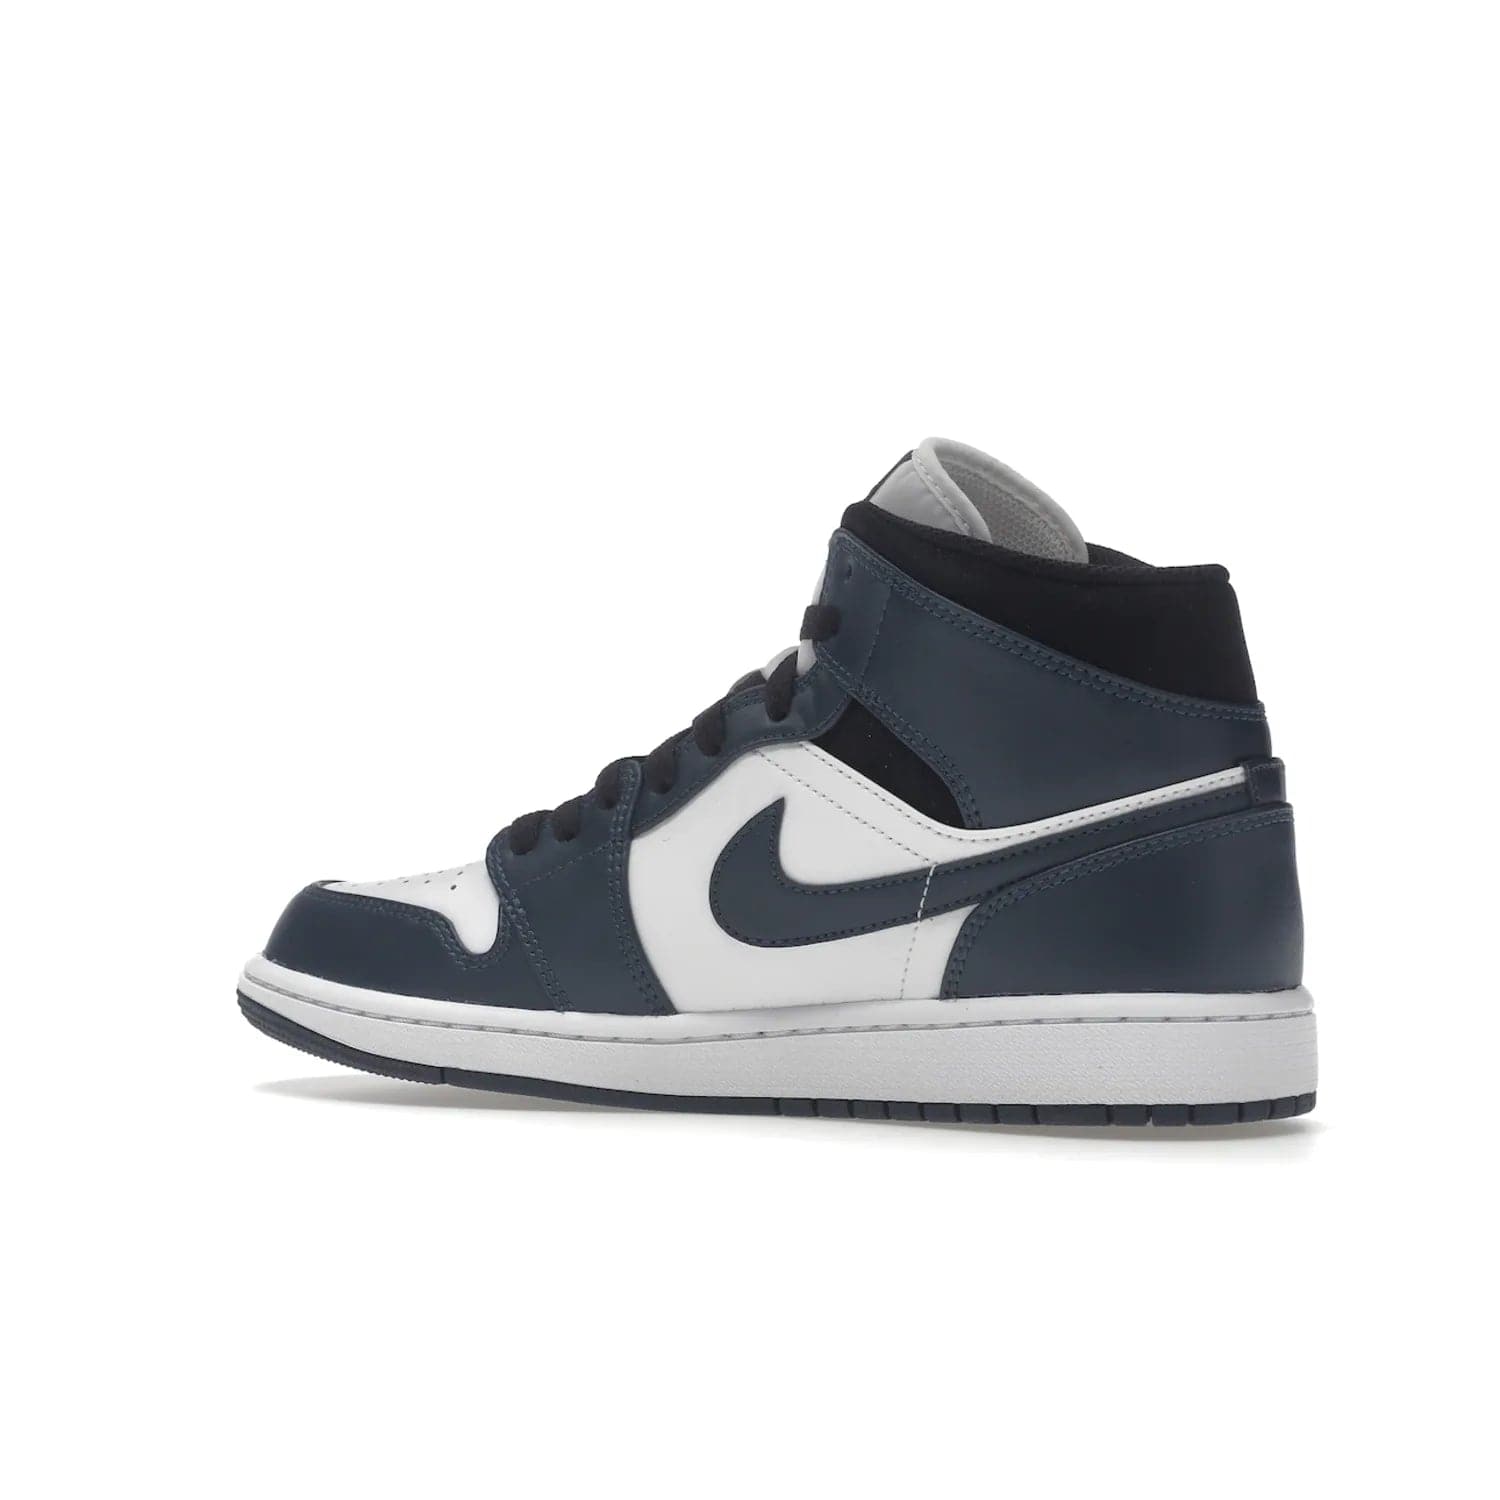 Jordan 1 Mid Armory Navy - Image 22 - Only at www.BallersClubKickz.com - The Jordan 1 Mid Armory Navy: classic basketball sneaker with soft white leather upper, deep navy blue overlays, and black leather ankle detailing. Iconic style with Jordan Wings logo and Jumpman label.